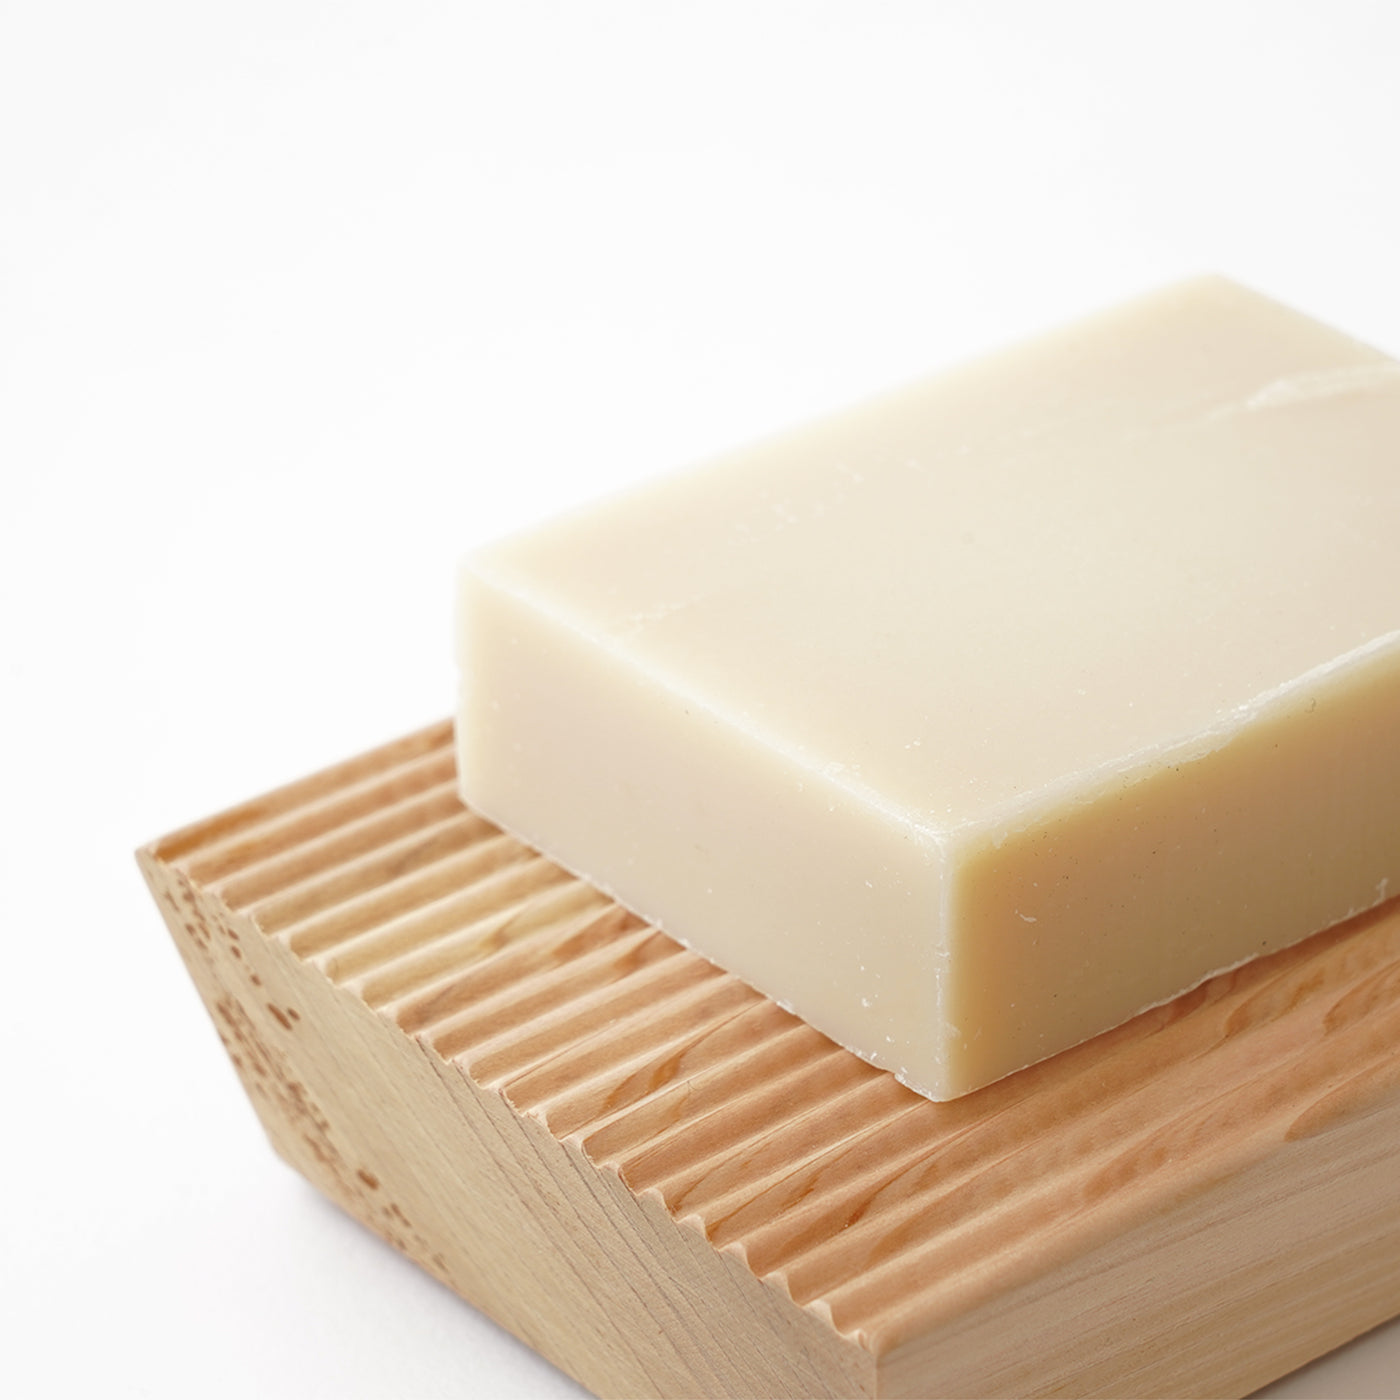 TOSARYU / HINOKI FOREST SHOWER SOAP